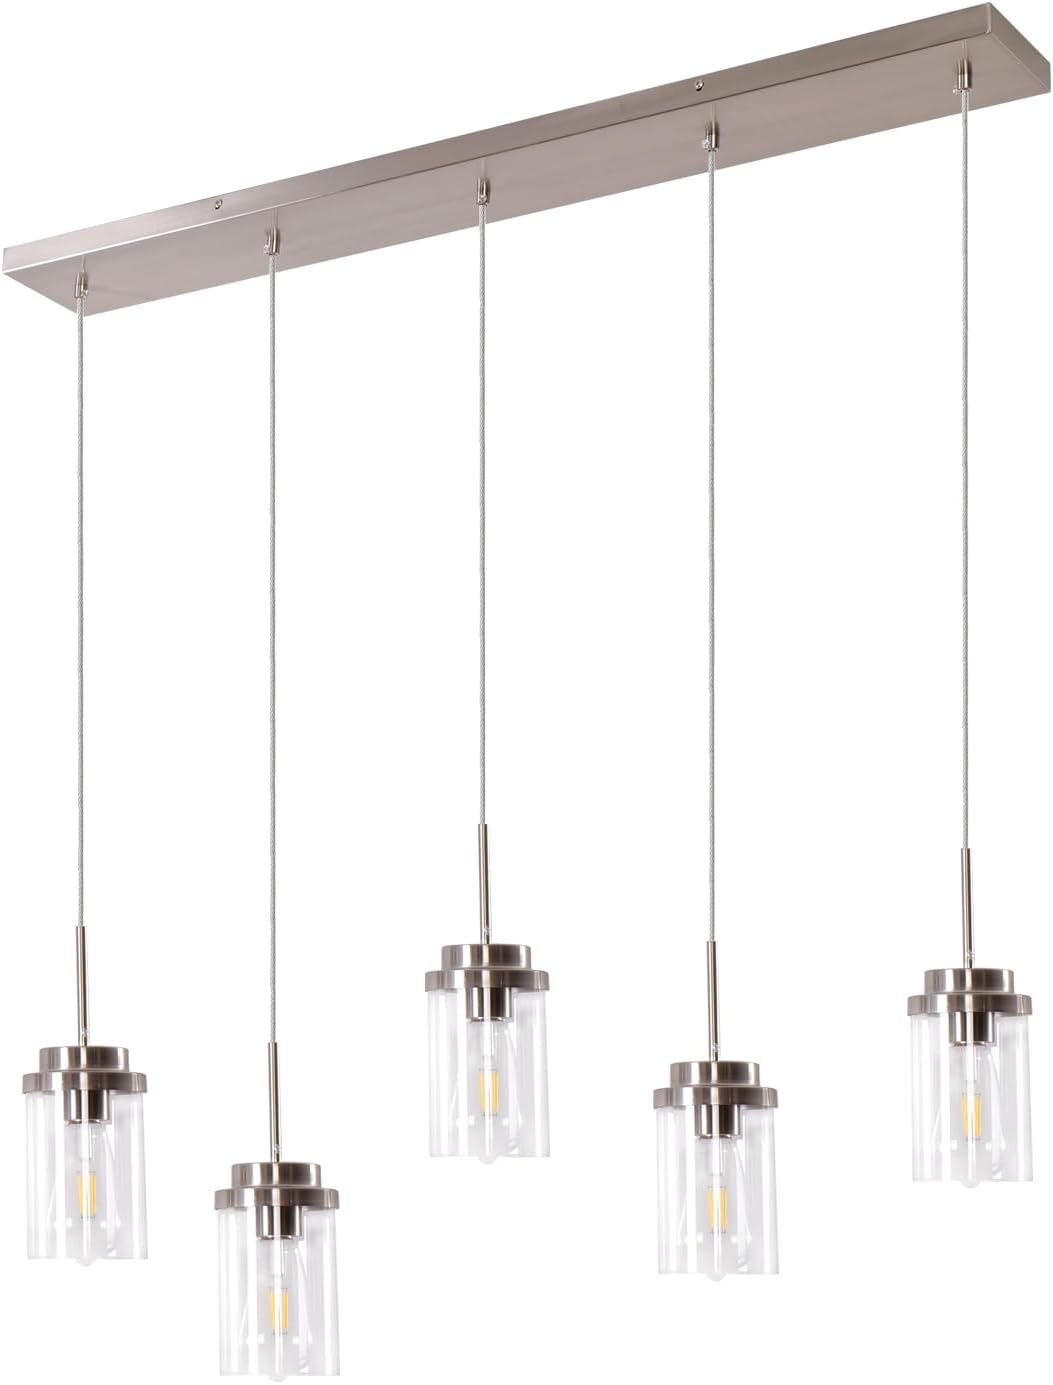 5 Lights Island Lights for Kitchen Modern Industrial Brushed Nickel Linear Chandeliers with Clear Glass Shade for Dining Room Kitchen Lighting Fixtures Ceiling Hanging